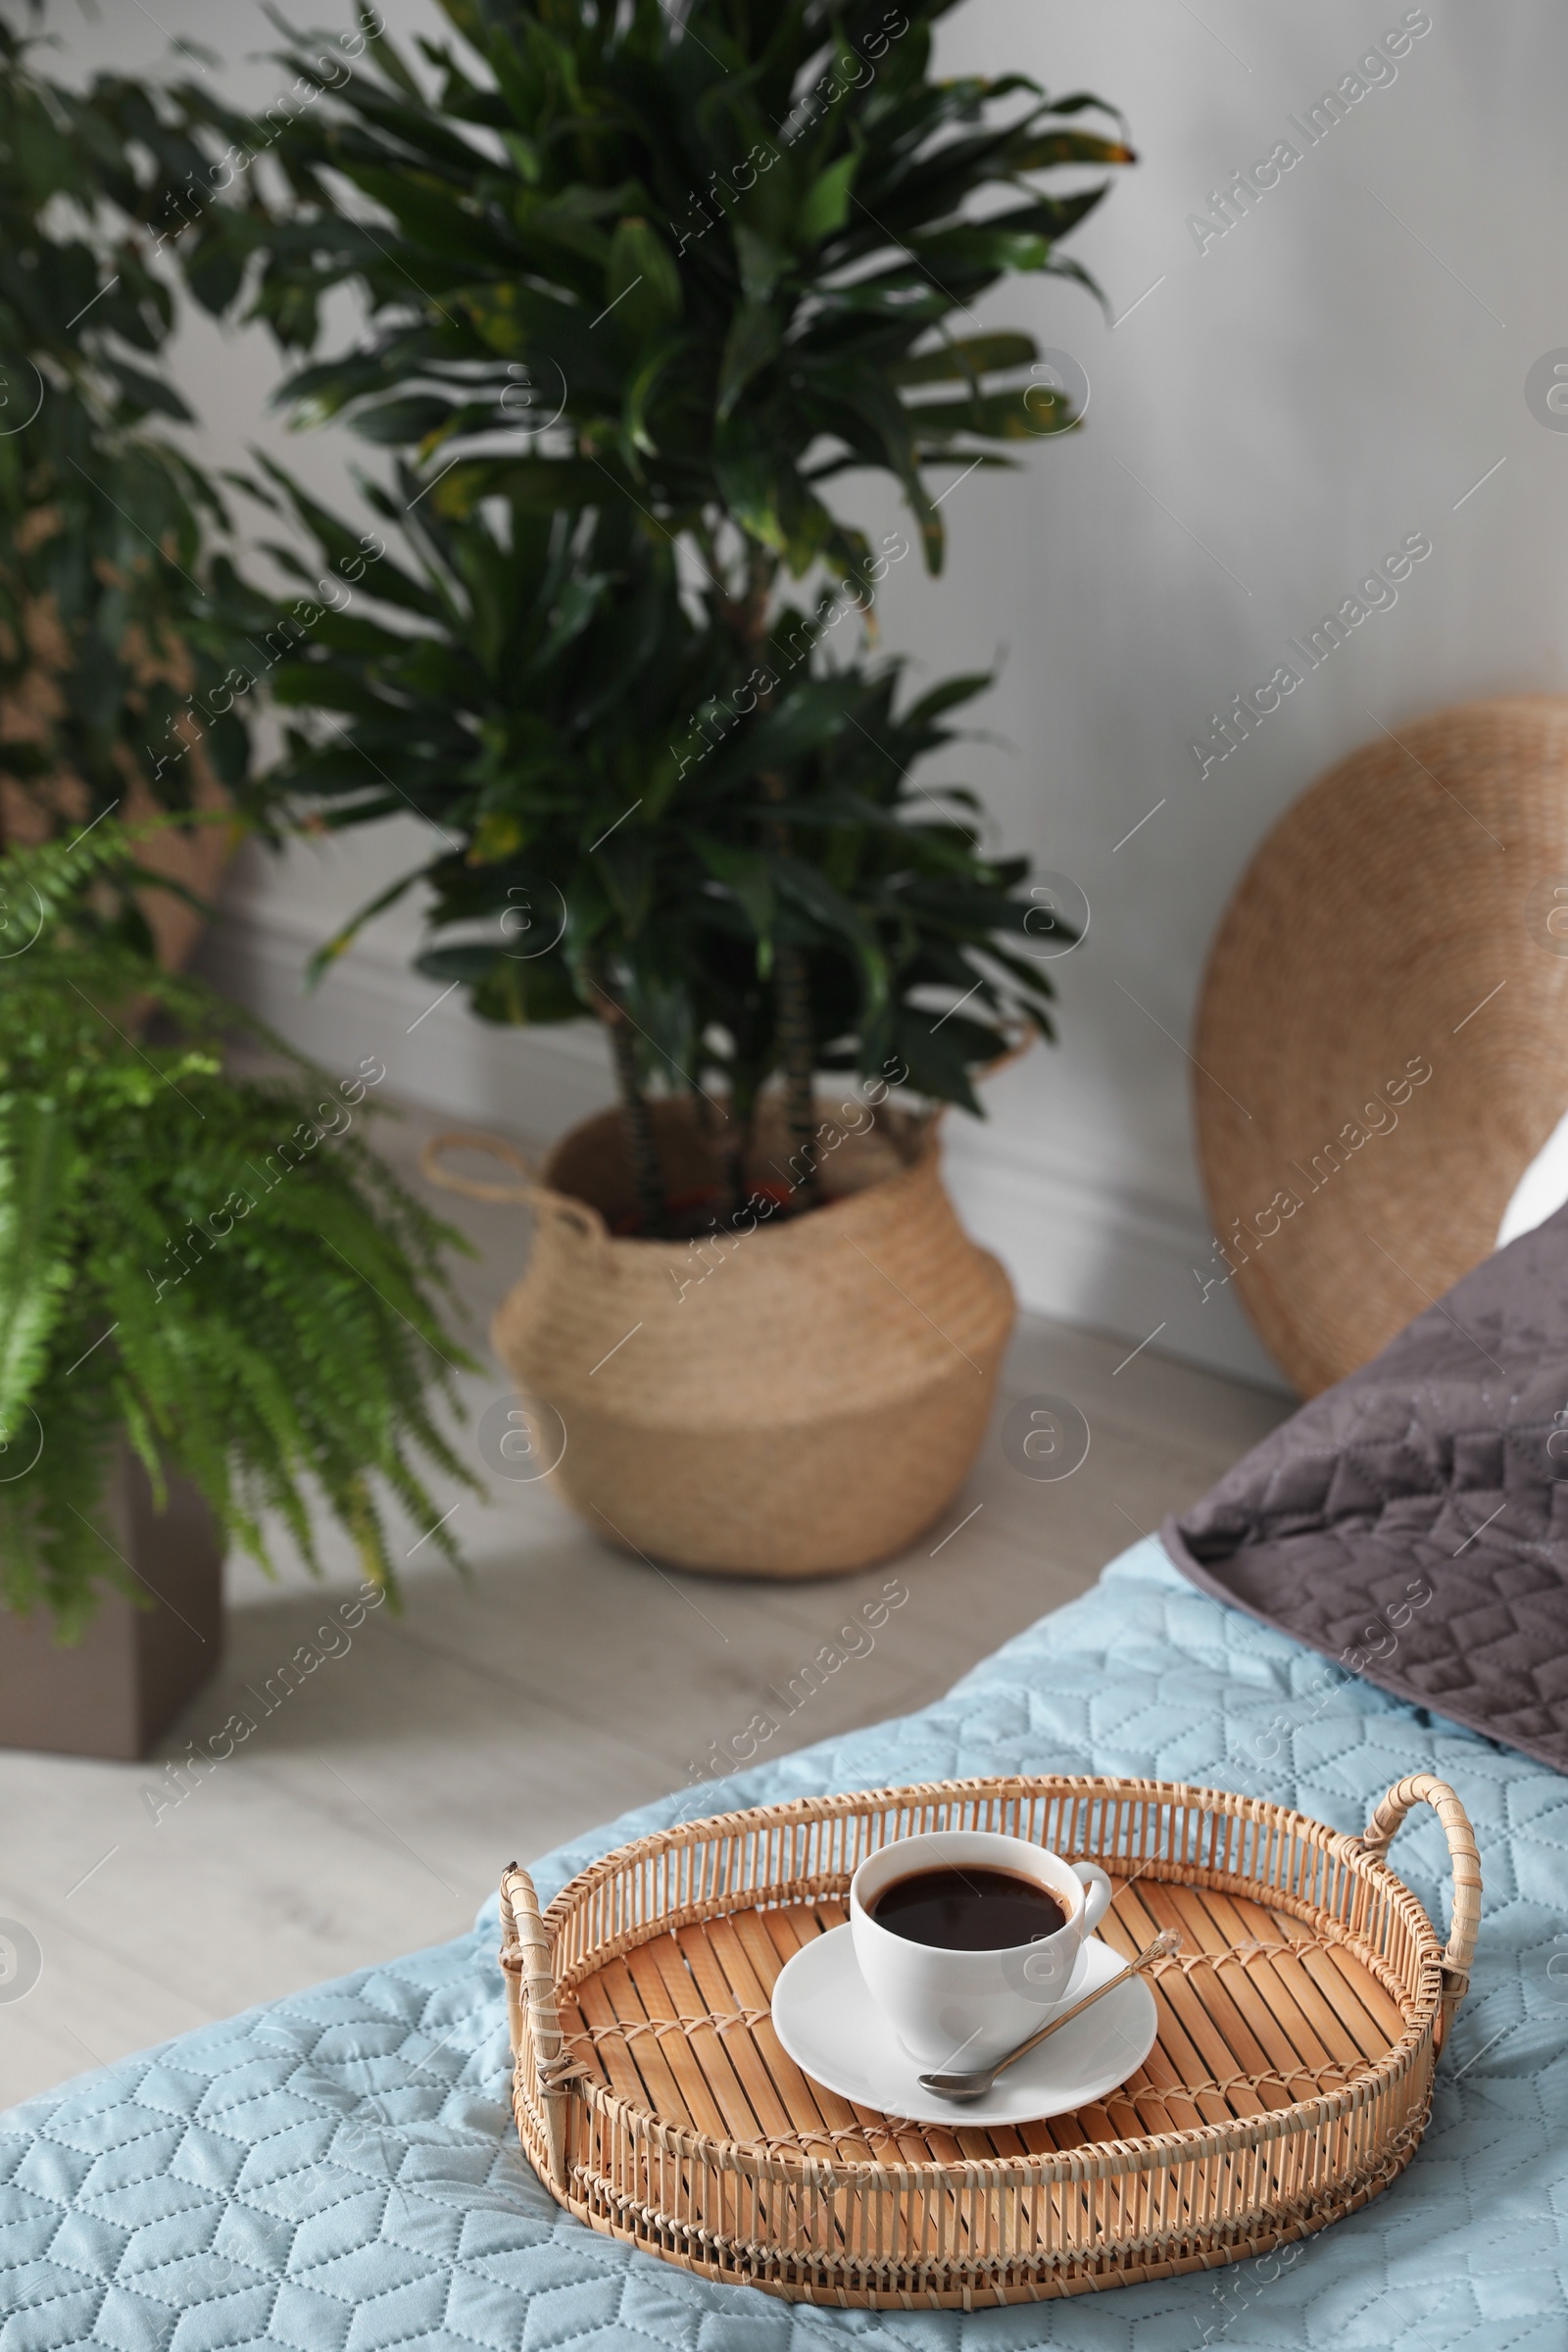 Photo of Cup of coffee on bed in room decorated with green plants. Home design ideas